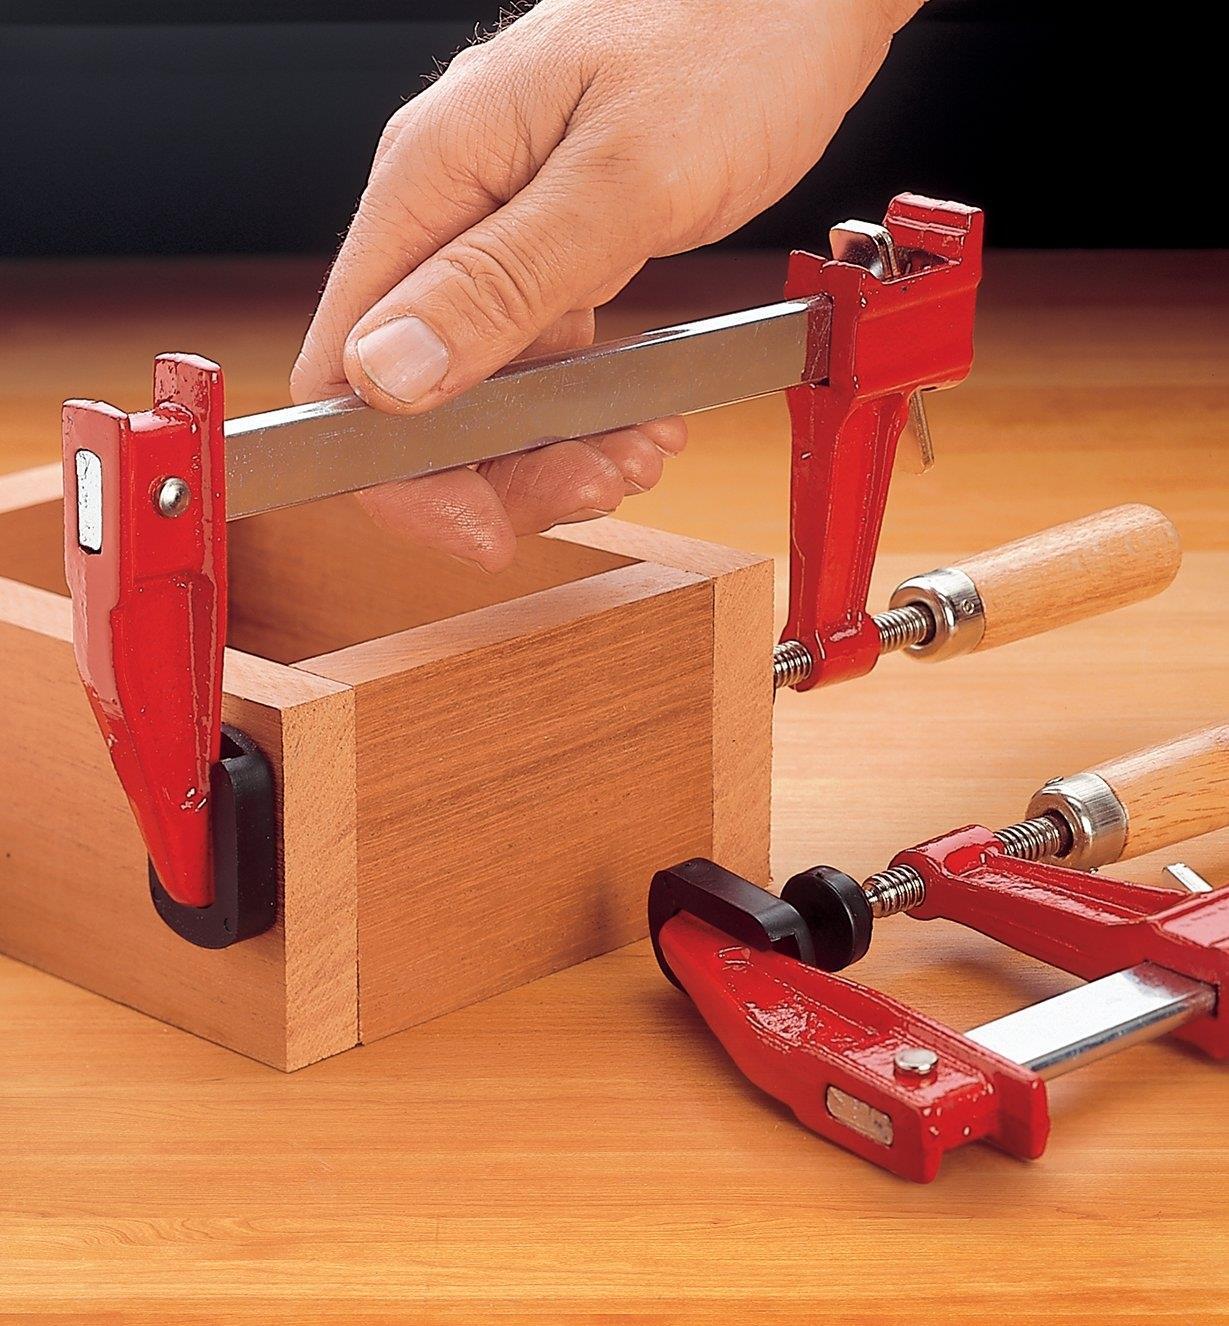 Clamping a small box with a 6" fast-acting clamp